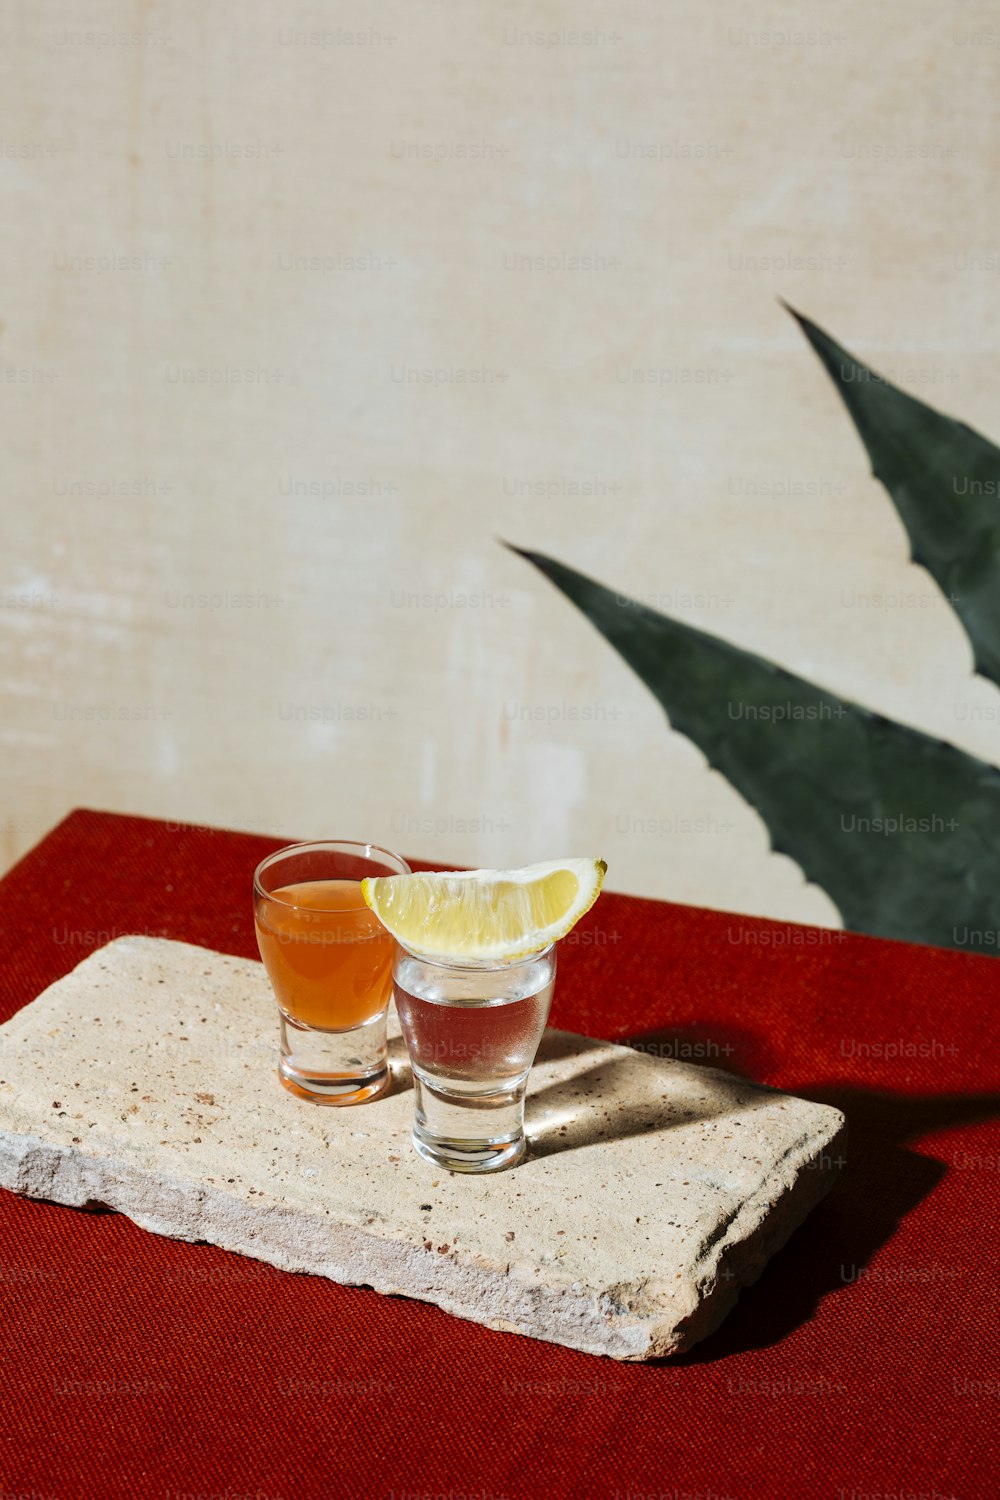 Tequila shot with sangrita, a customary partner with  orange, lime, tomato or pomegranate. Mexican flag colors